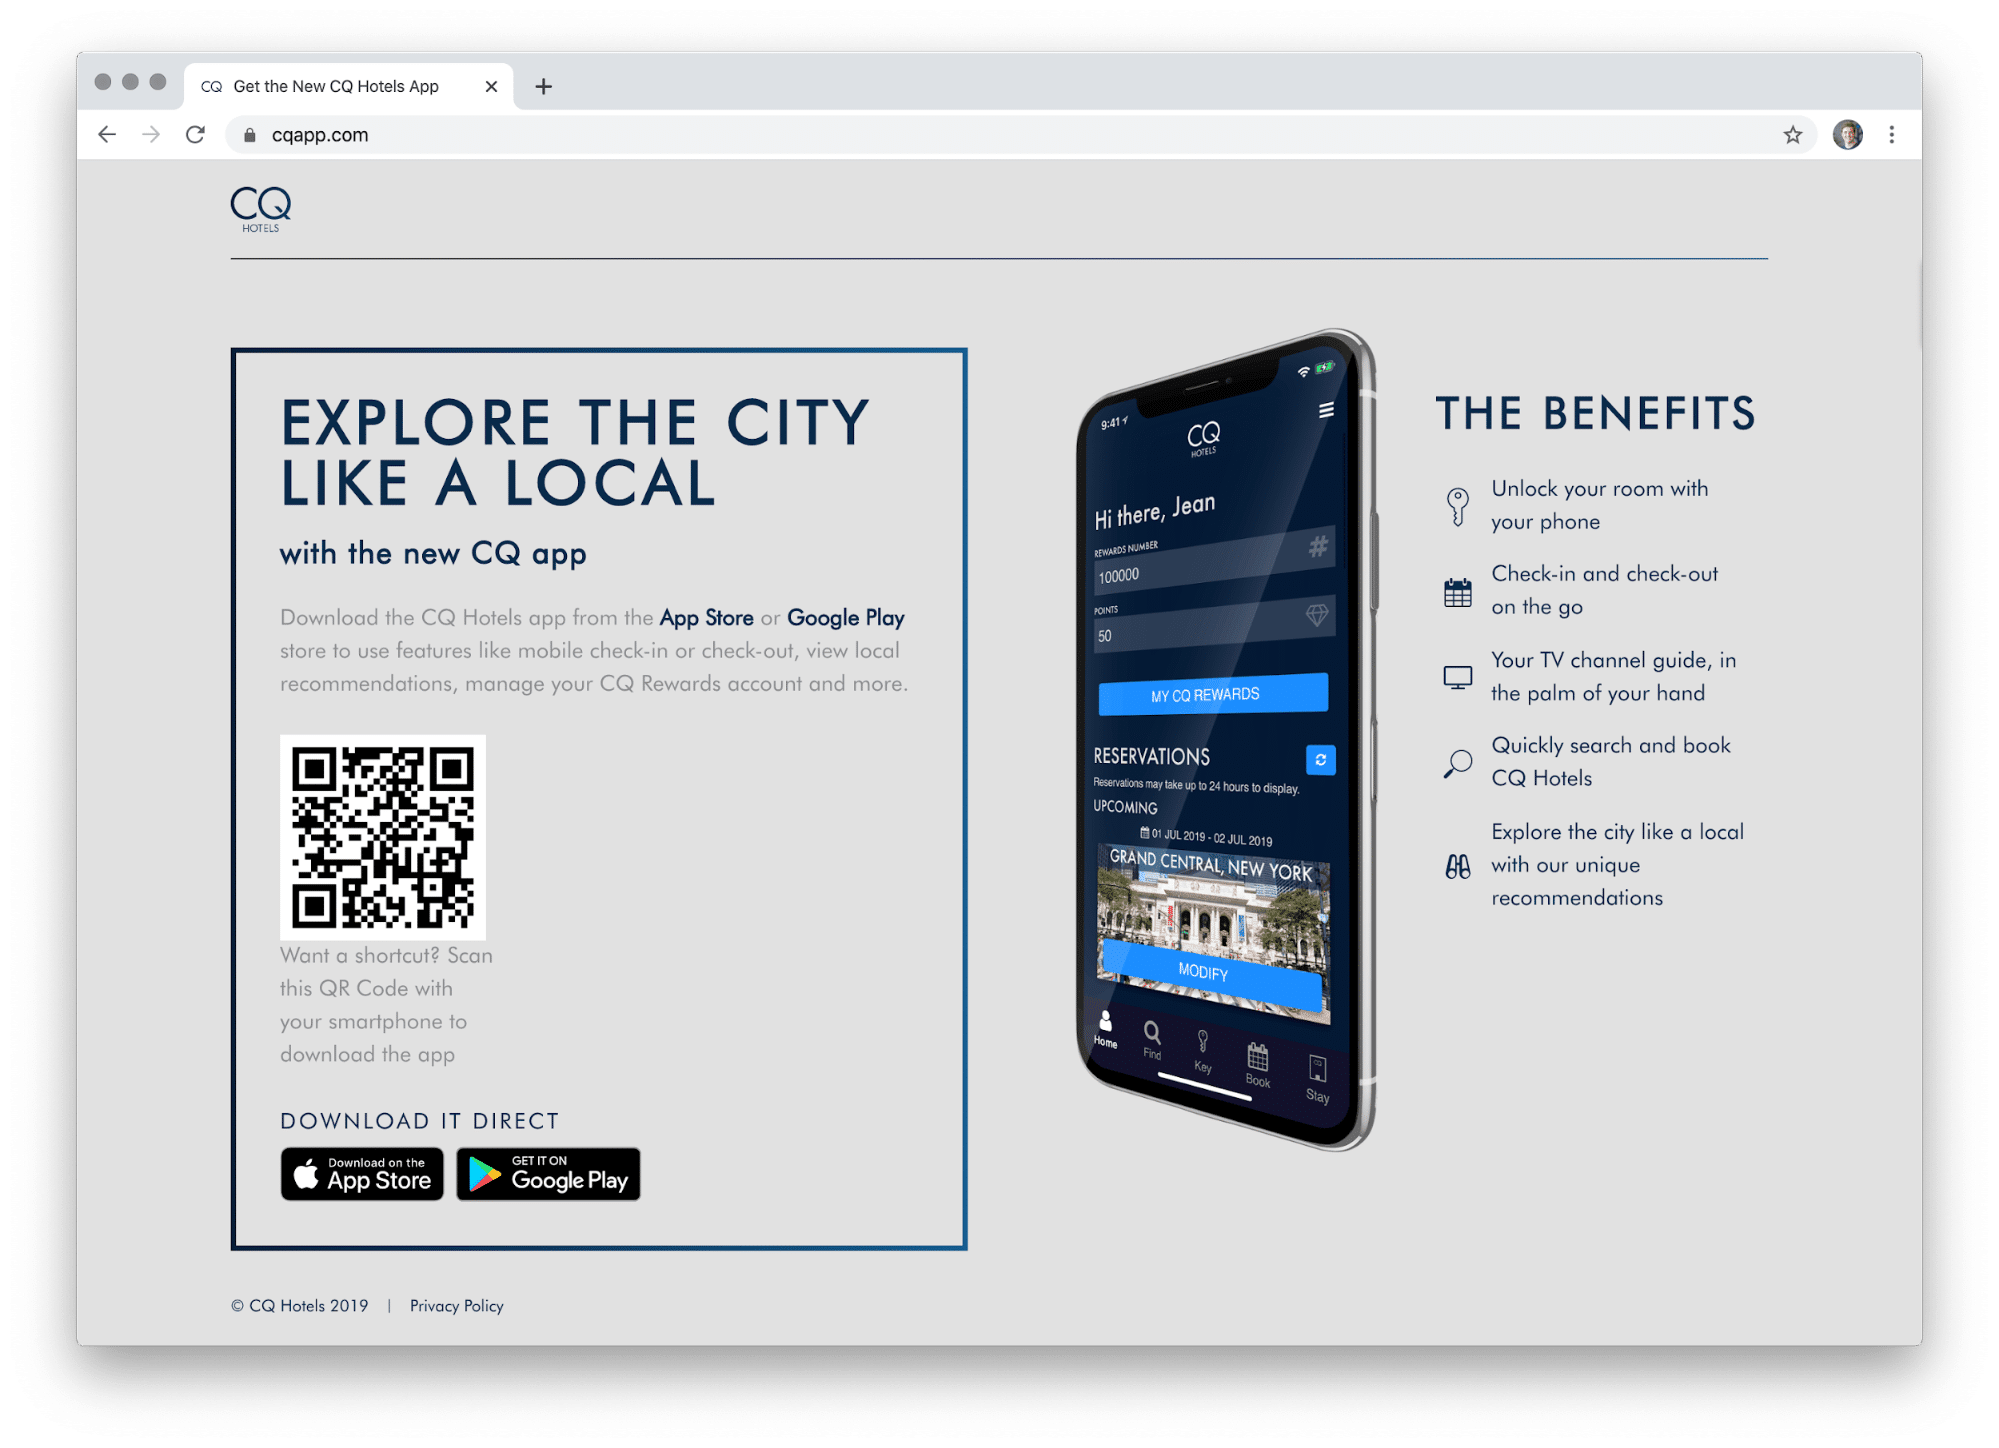 Screenshot of CQ Hotels website: a full page advertising the benefits of the mobile app, including a QR code for viewers to scan and download the advertised app.